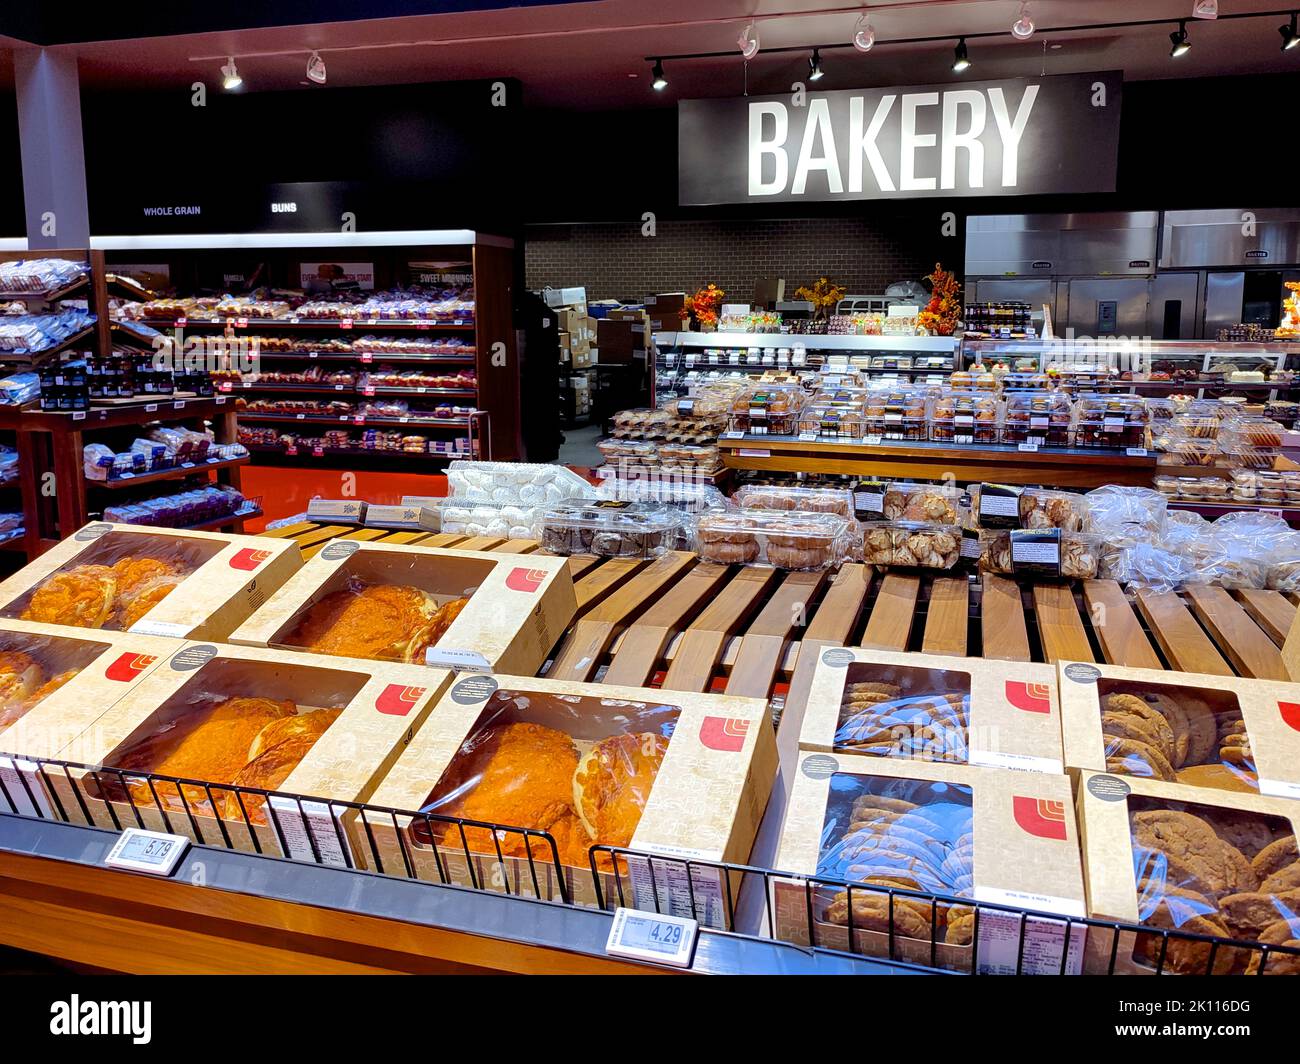 Bakery foods for sale in the supermarket Stock Photo